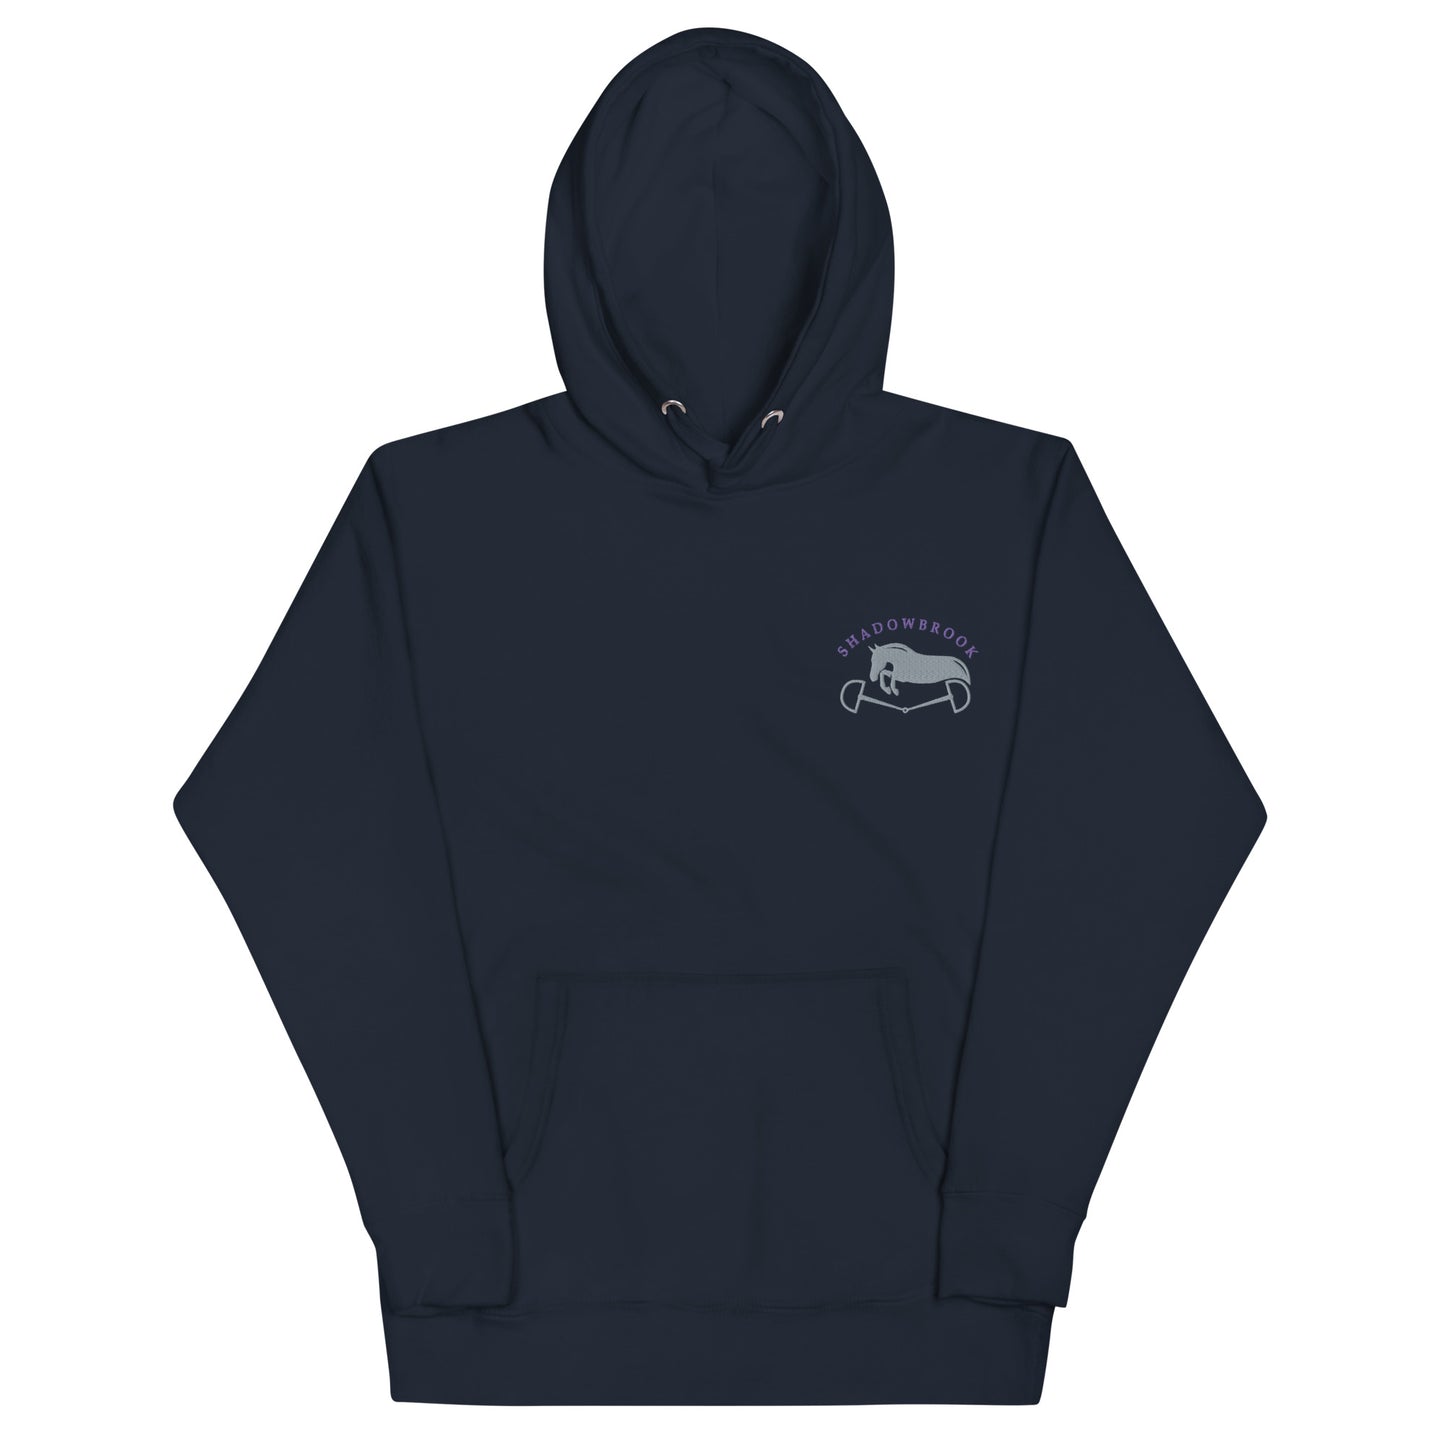 Shadowbrook Stables Navy Unisex Hoodie - Small Logo Front